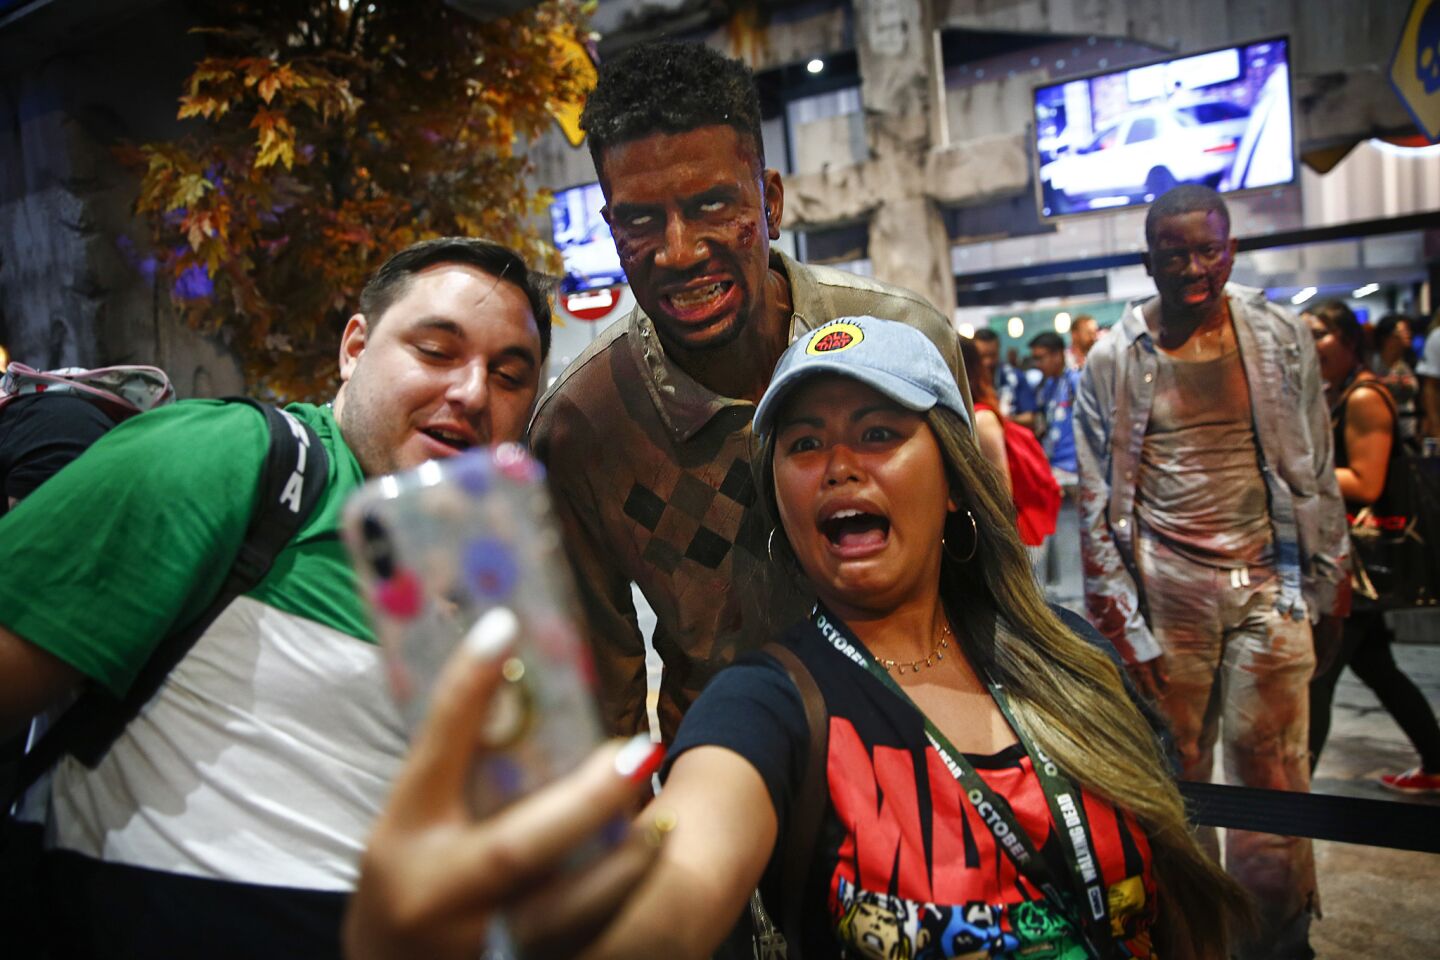 At left, Tim Walker, 26, of San Diego, and Julia Homitano, 27, of San Diego, take a selfie with zombies while waiting in line at "The Walking Dead" booth.